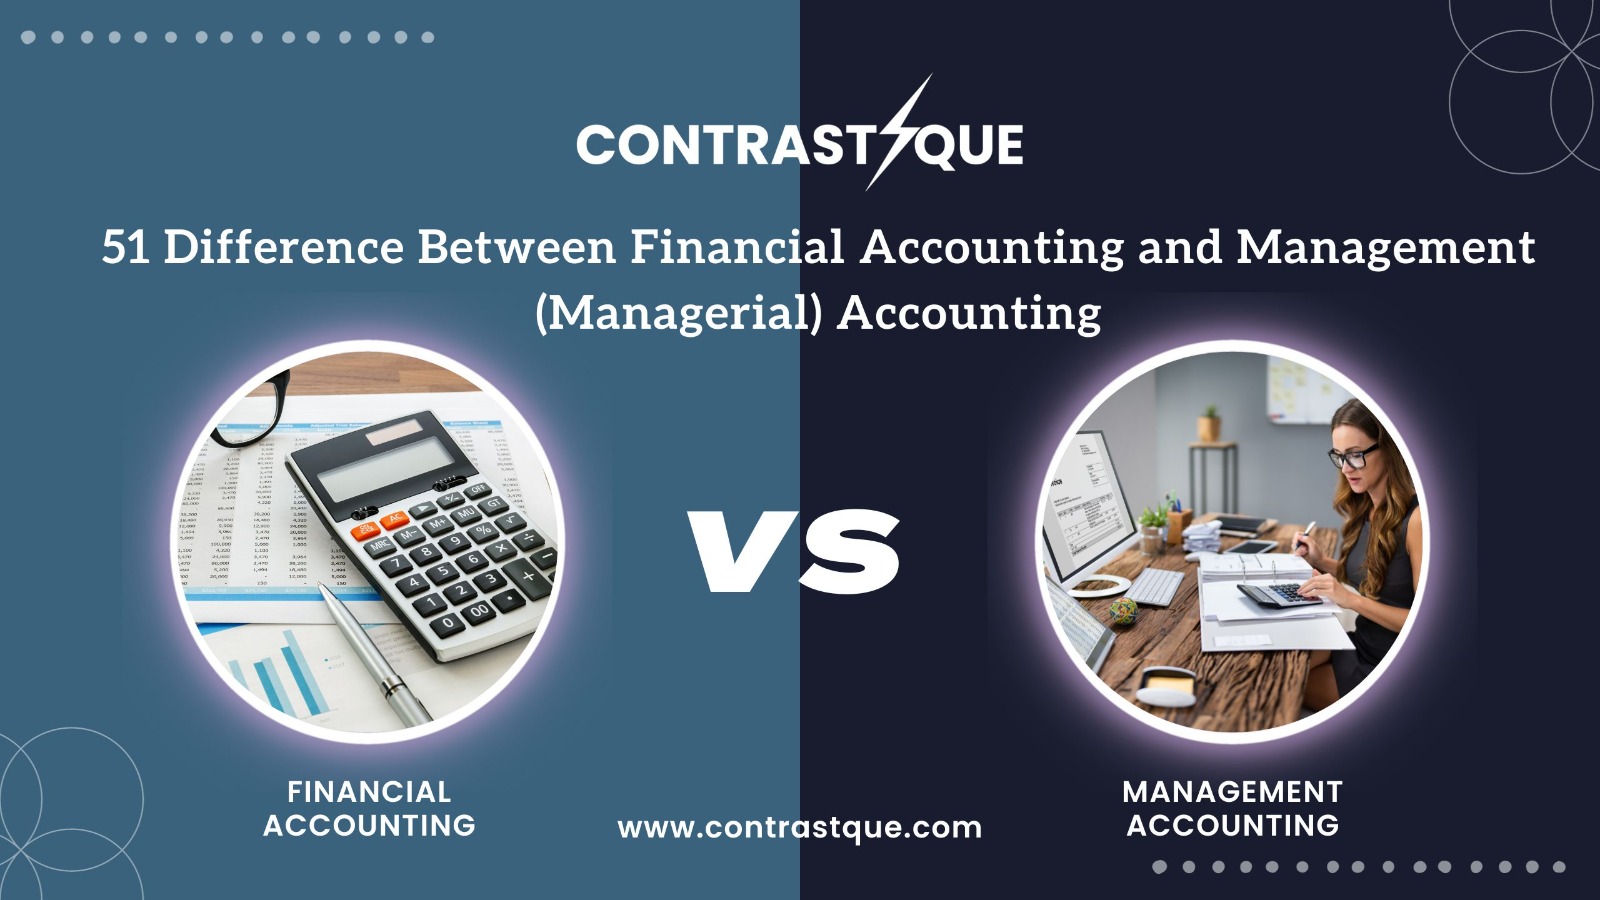 51 Difference Between Financial Accounting and Management (Managerial) Accounting